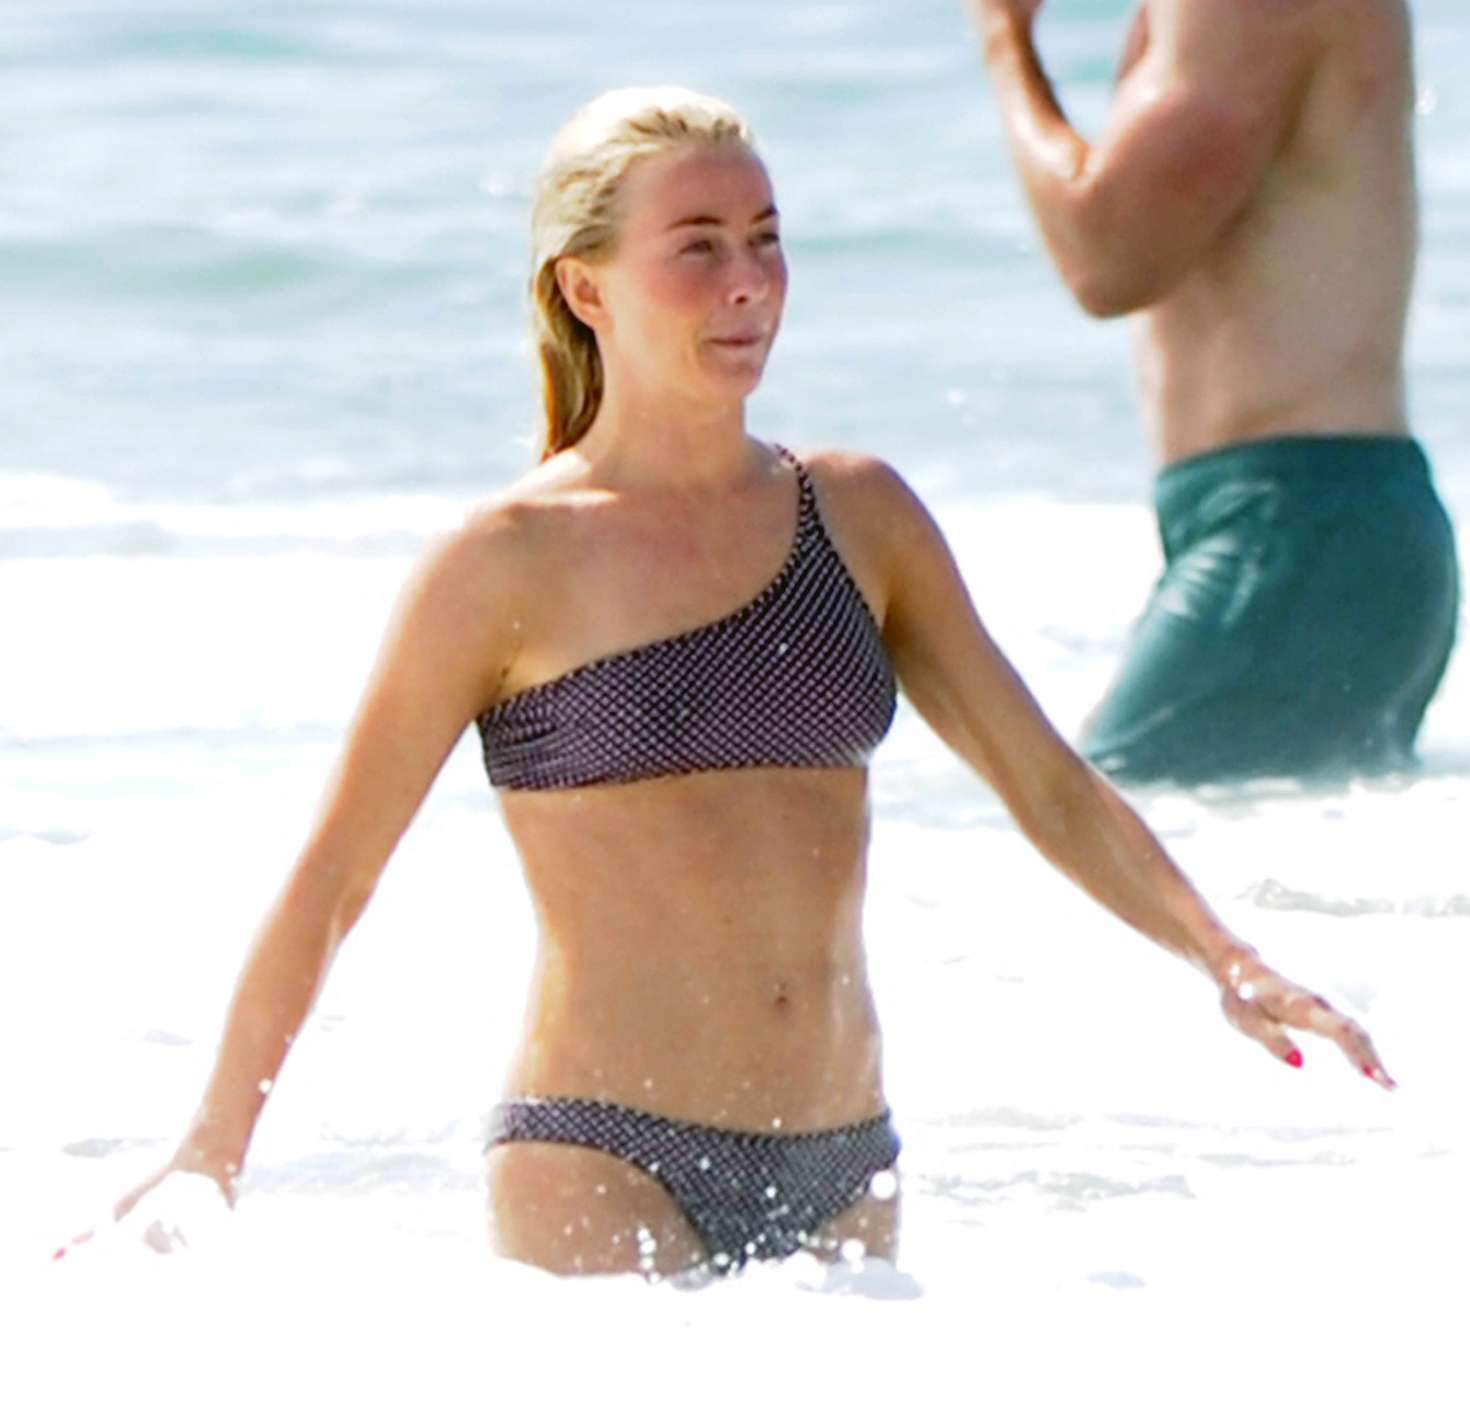 Julianne Hough Poses For Pictures, Reveals Shes Not 